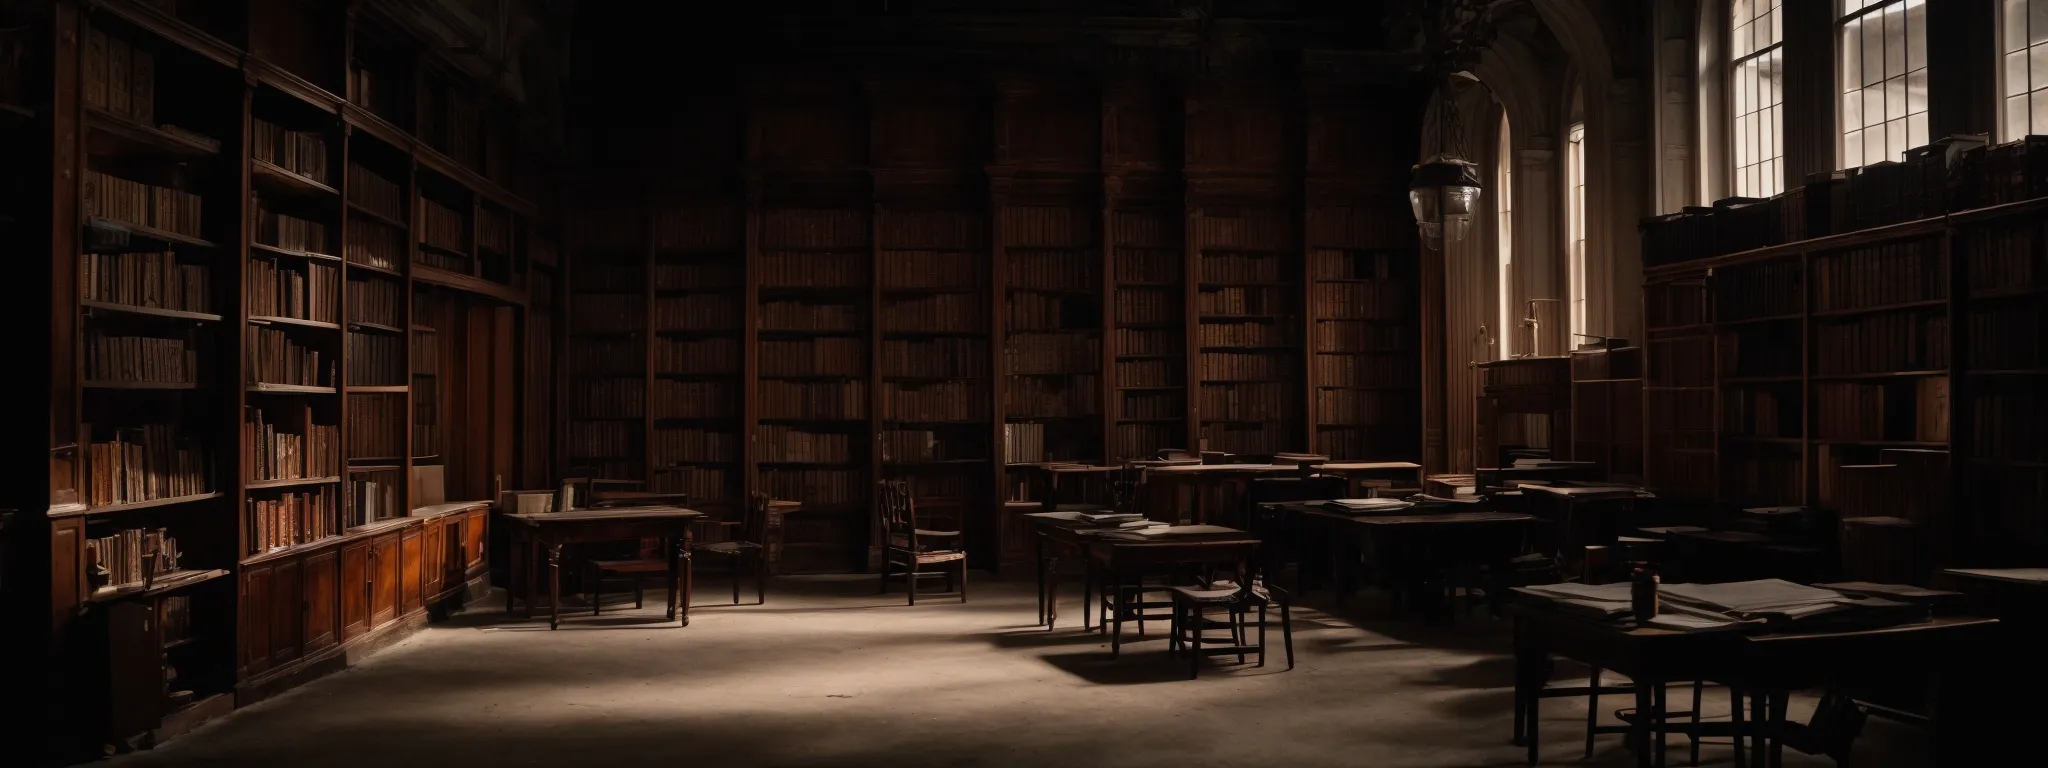 an old library with empty shelves gathering dust in a dimly lit room, symbolizing the closure of a once-critical source of information.